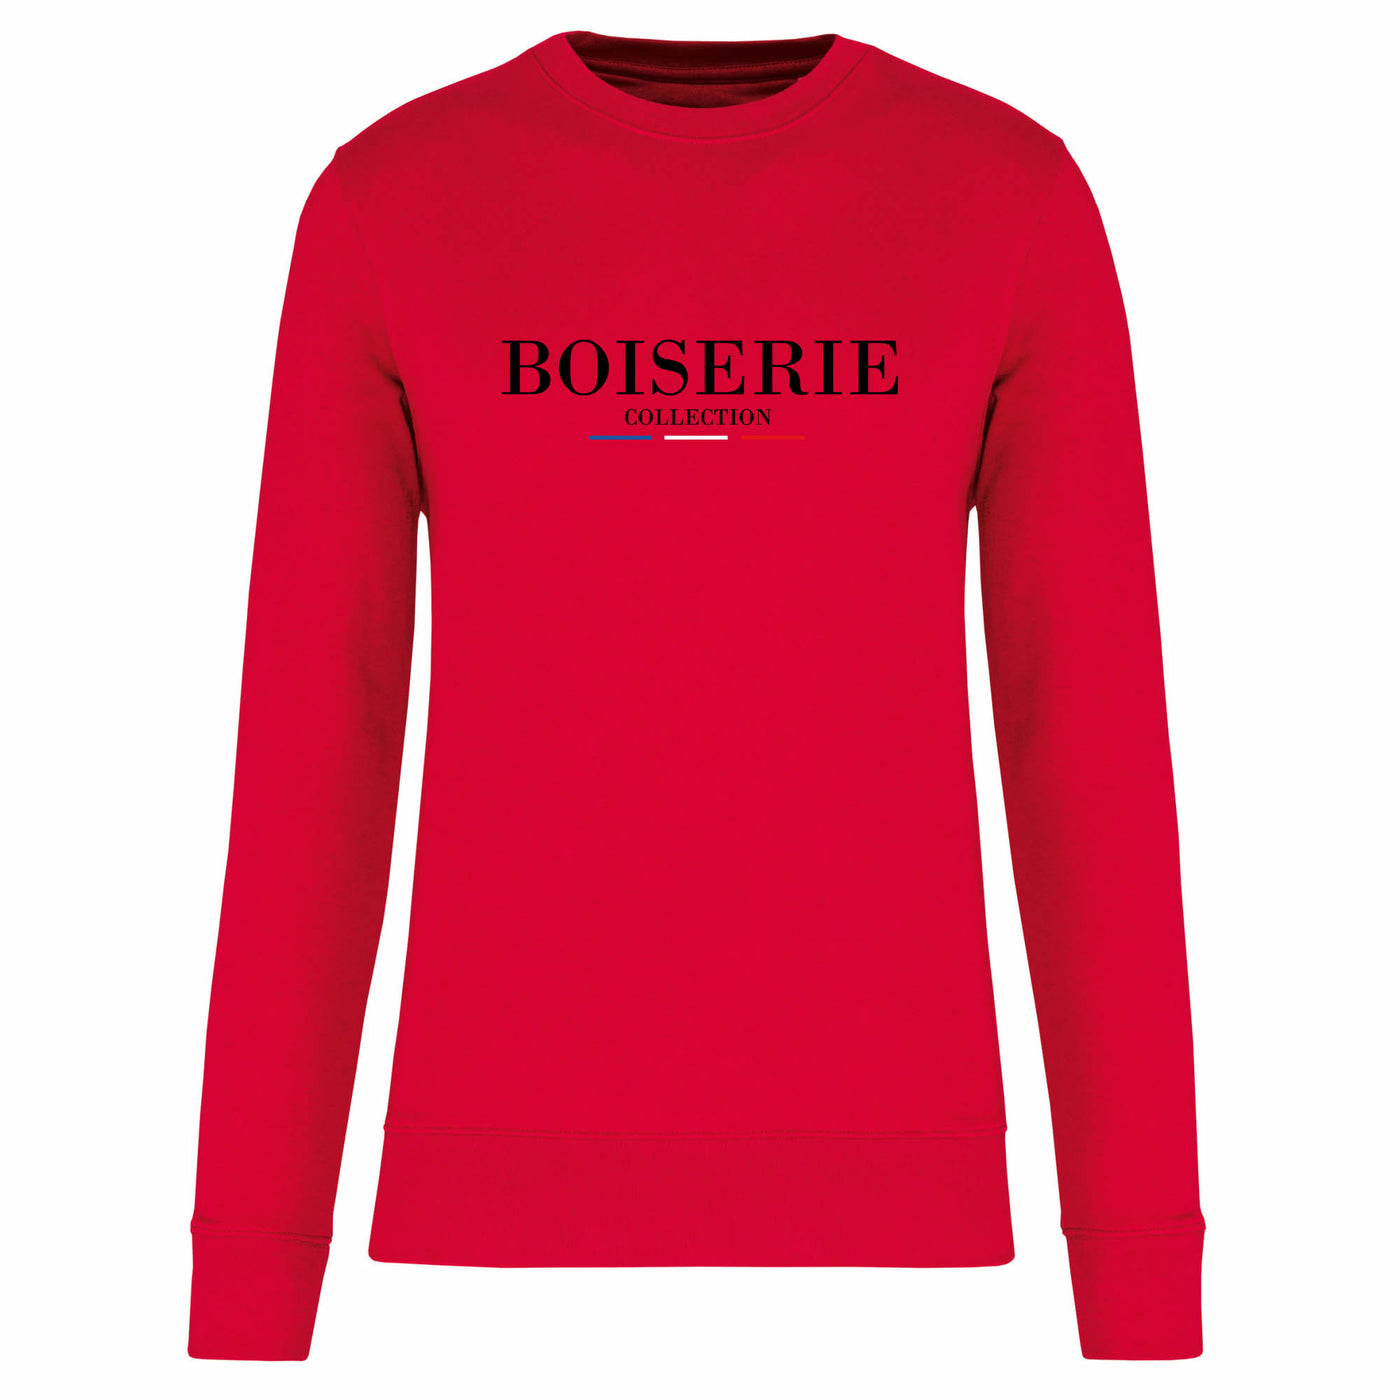 LE PULL BOISERIE COLLECTION ROUGE